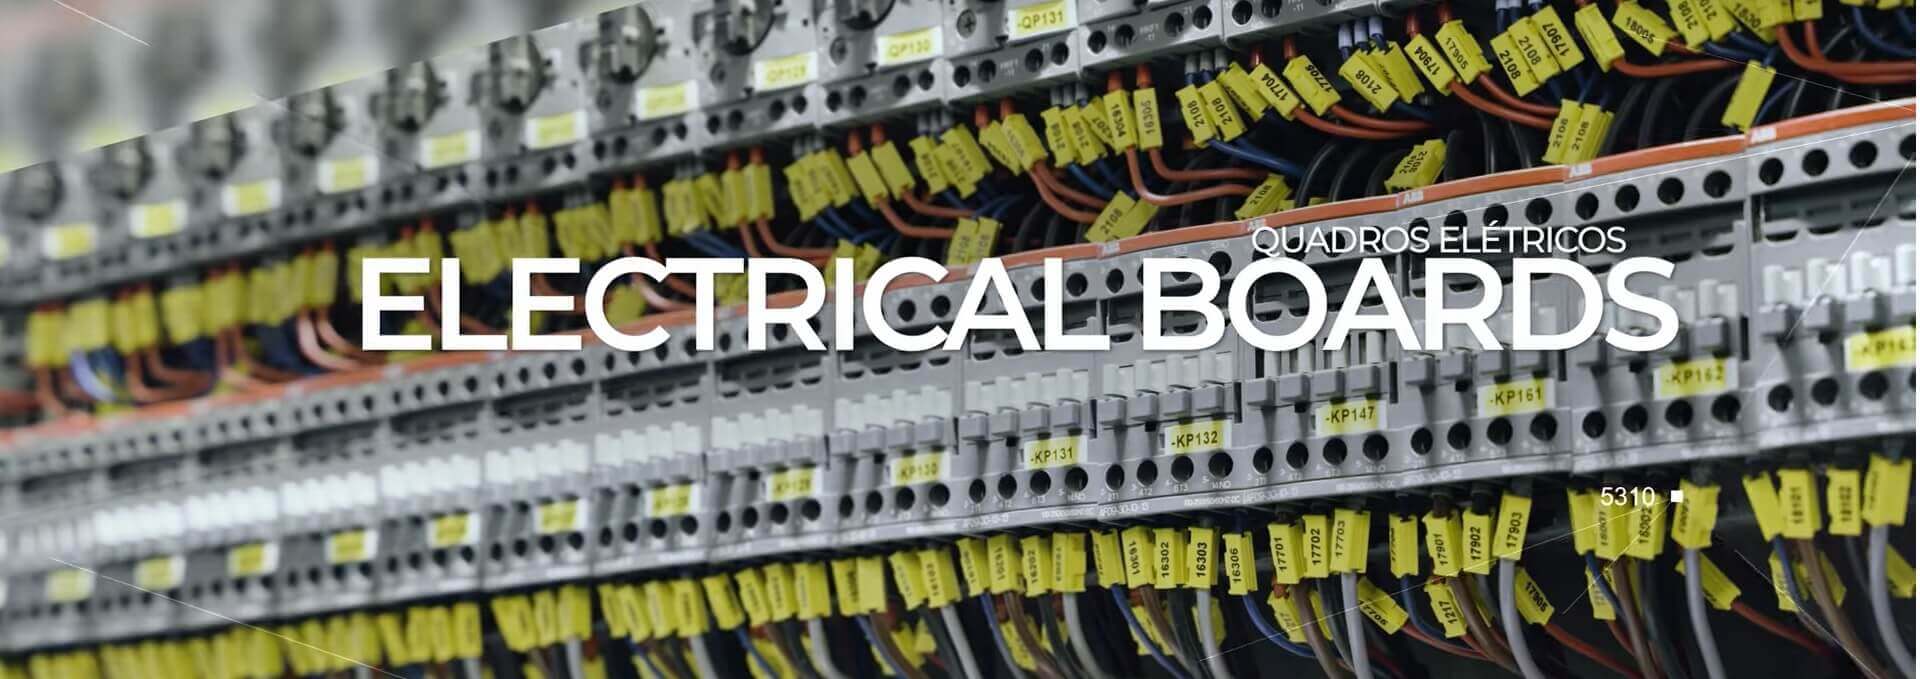 electricalboards